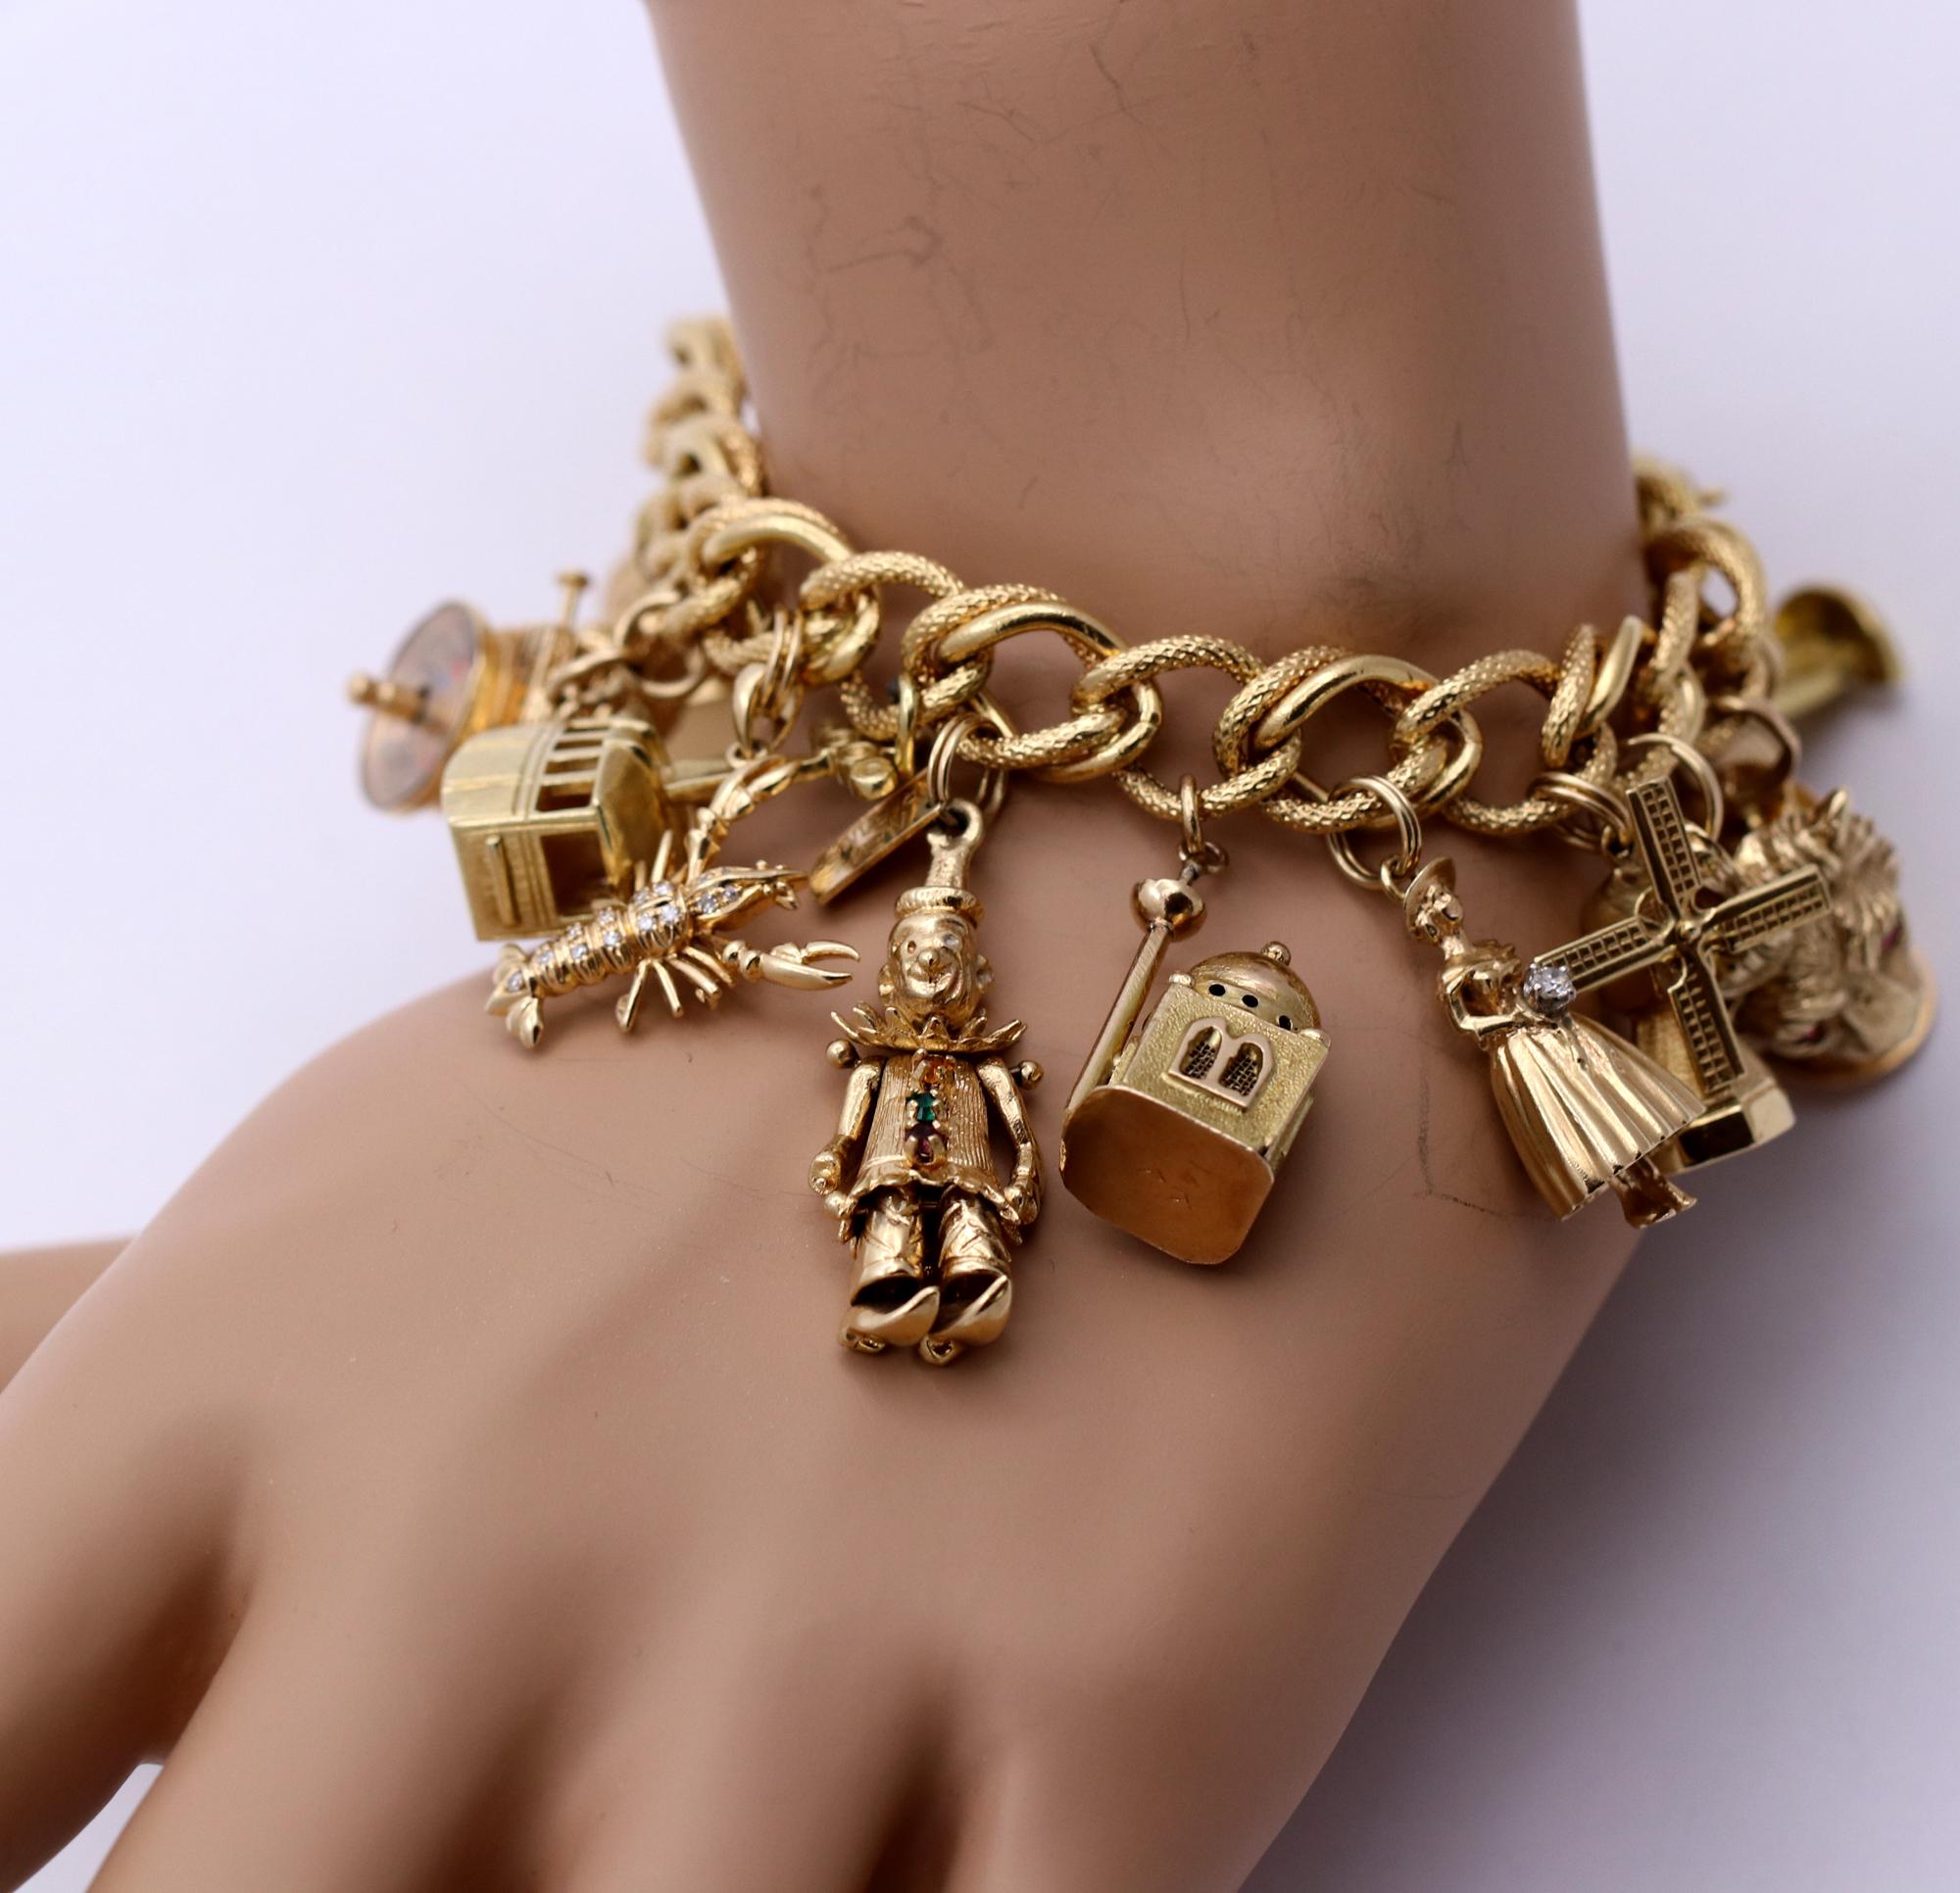 Women's Midcentury Gold Charm Bracelet with 20 Travel Themed Charms